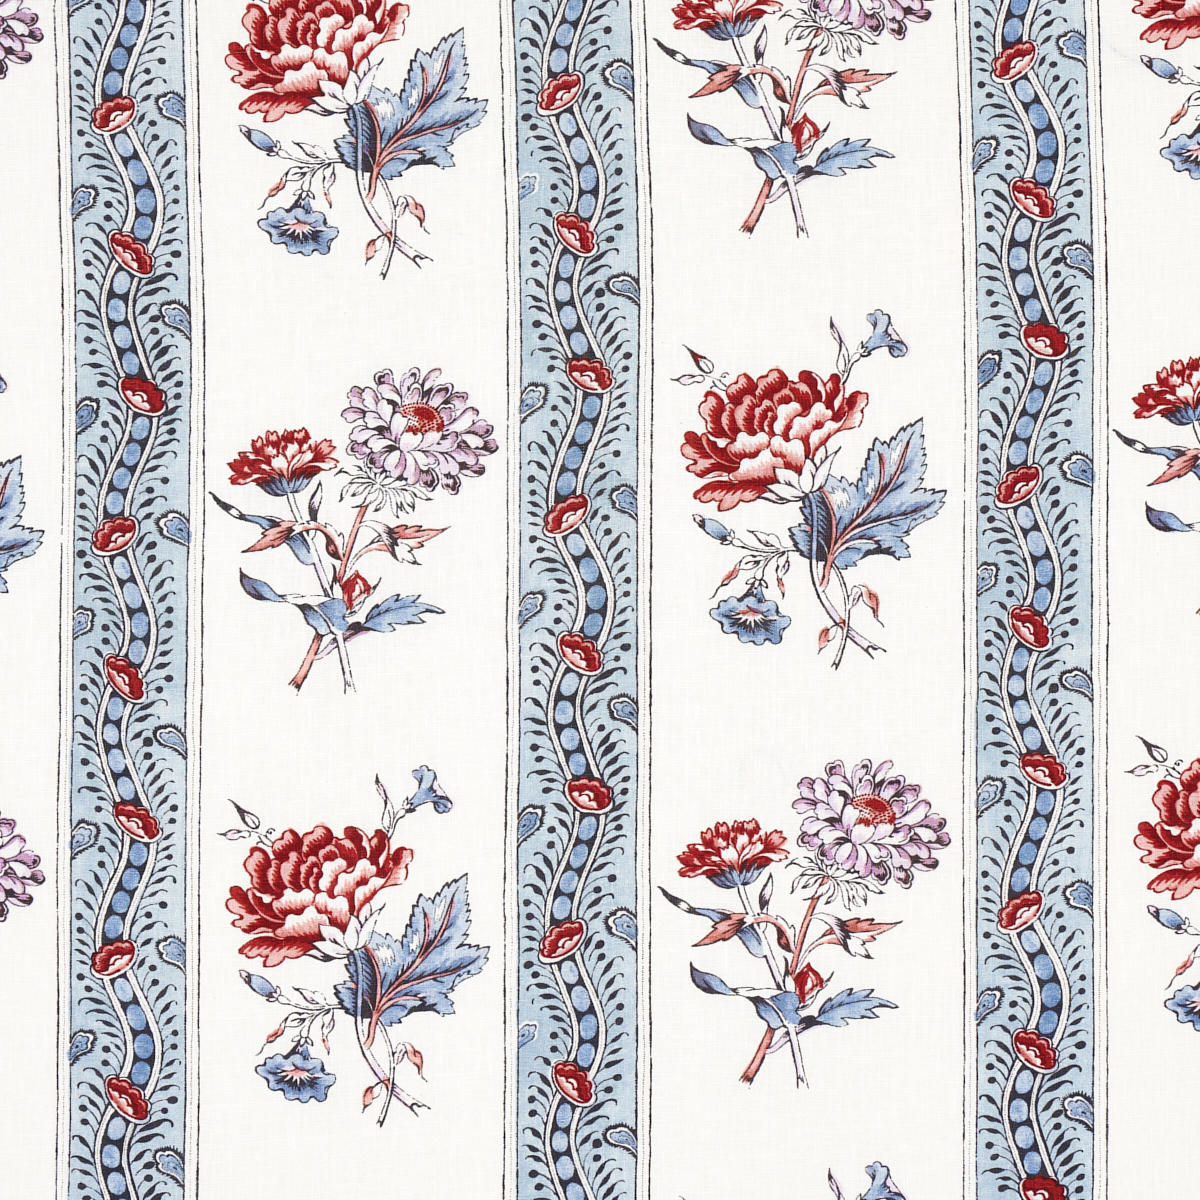 Schumacher Ariana Floral Stripe in Pearlware Blue - Paper-Backed Fabric